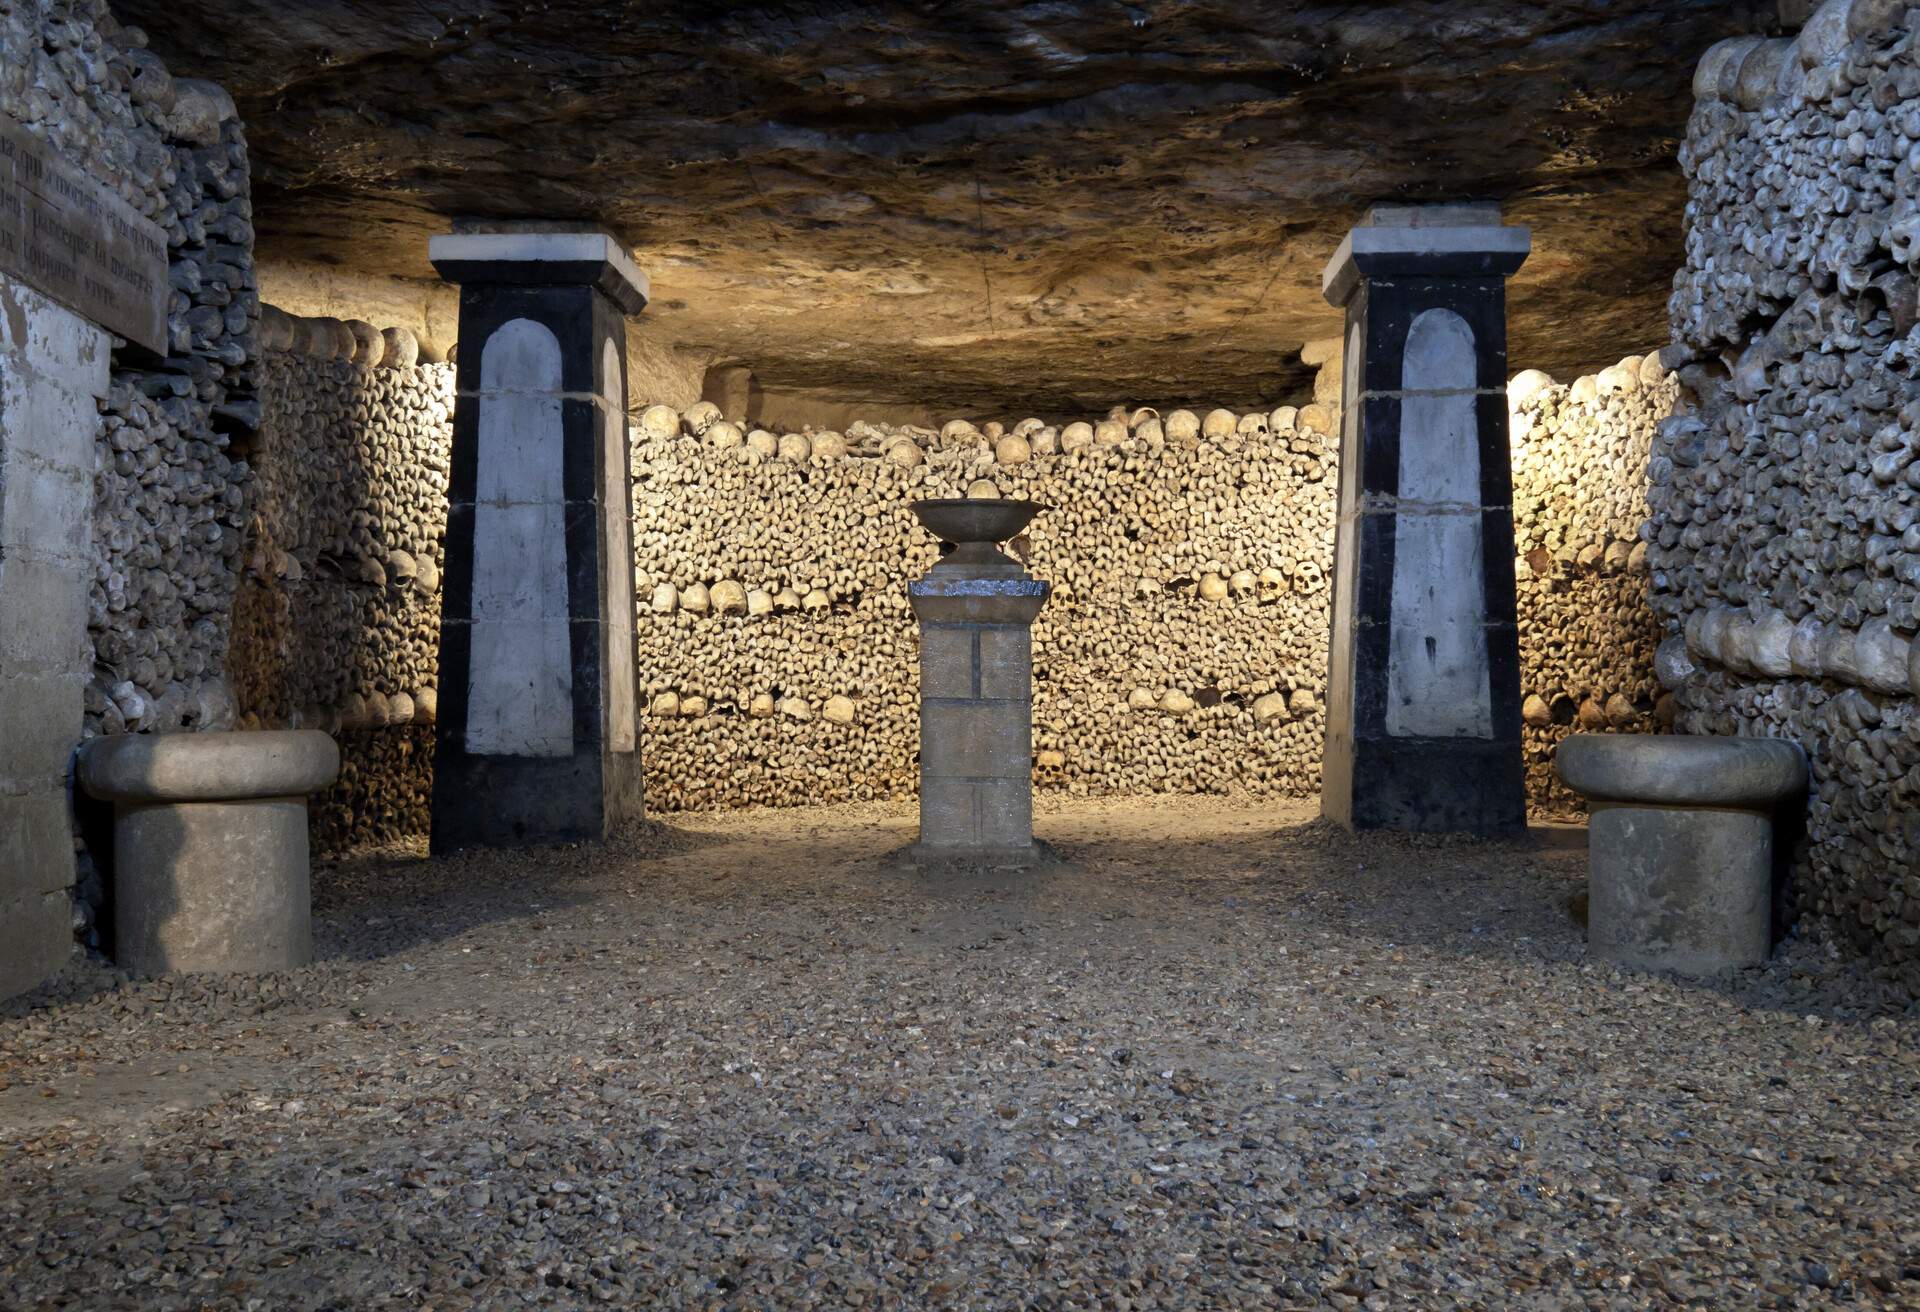 The inside of an underground ossuary with pillars and stacked human skulls and bones.